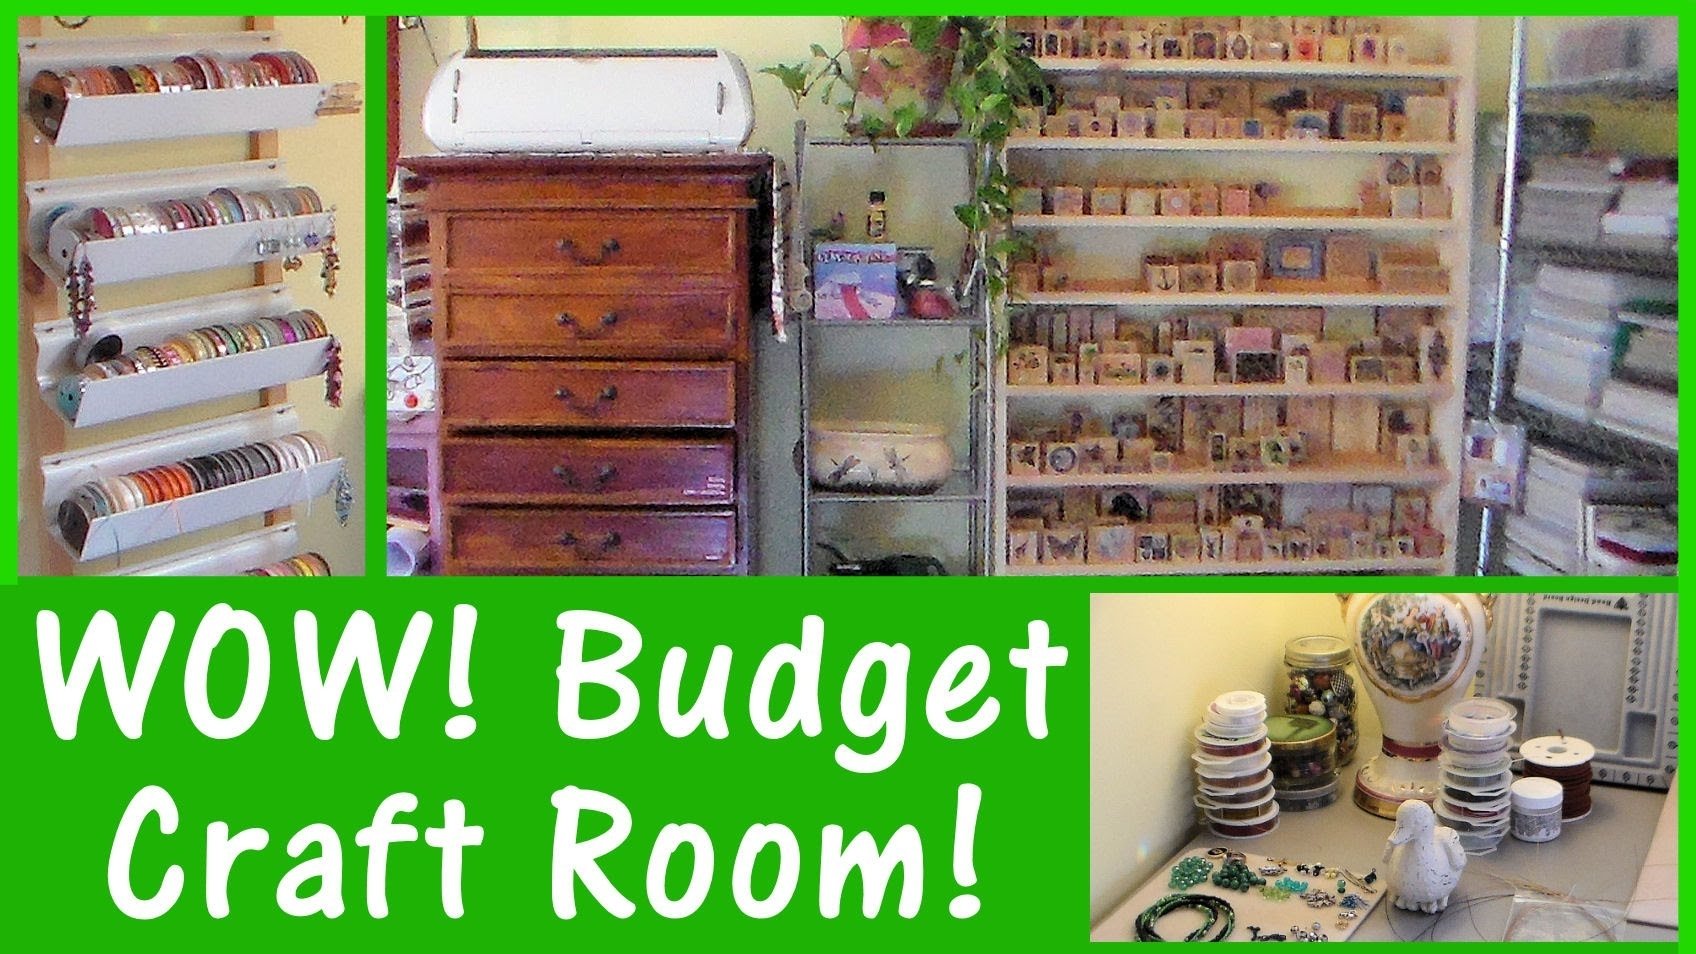 10 Stunning Craft Room Ideas On A Budget new home real craft room set up money saving tips ideas youtube 2023